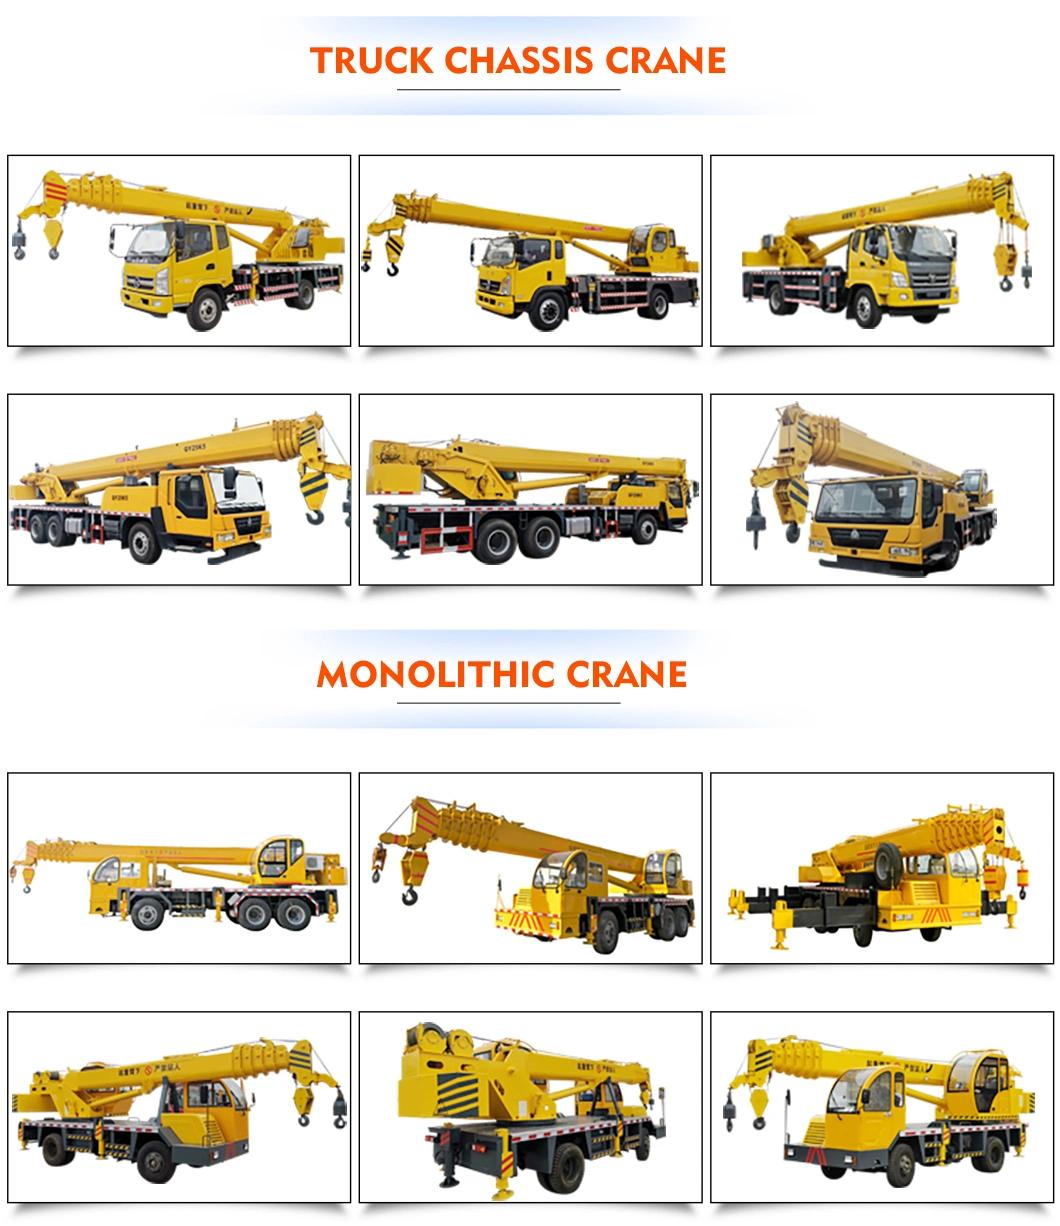 Looking Crane for Truck Use Mobile Crane 25 Tons 30 Ton Mobile Crane Price